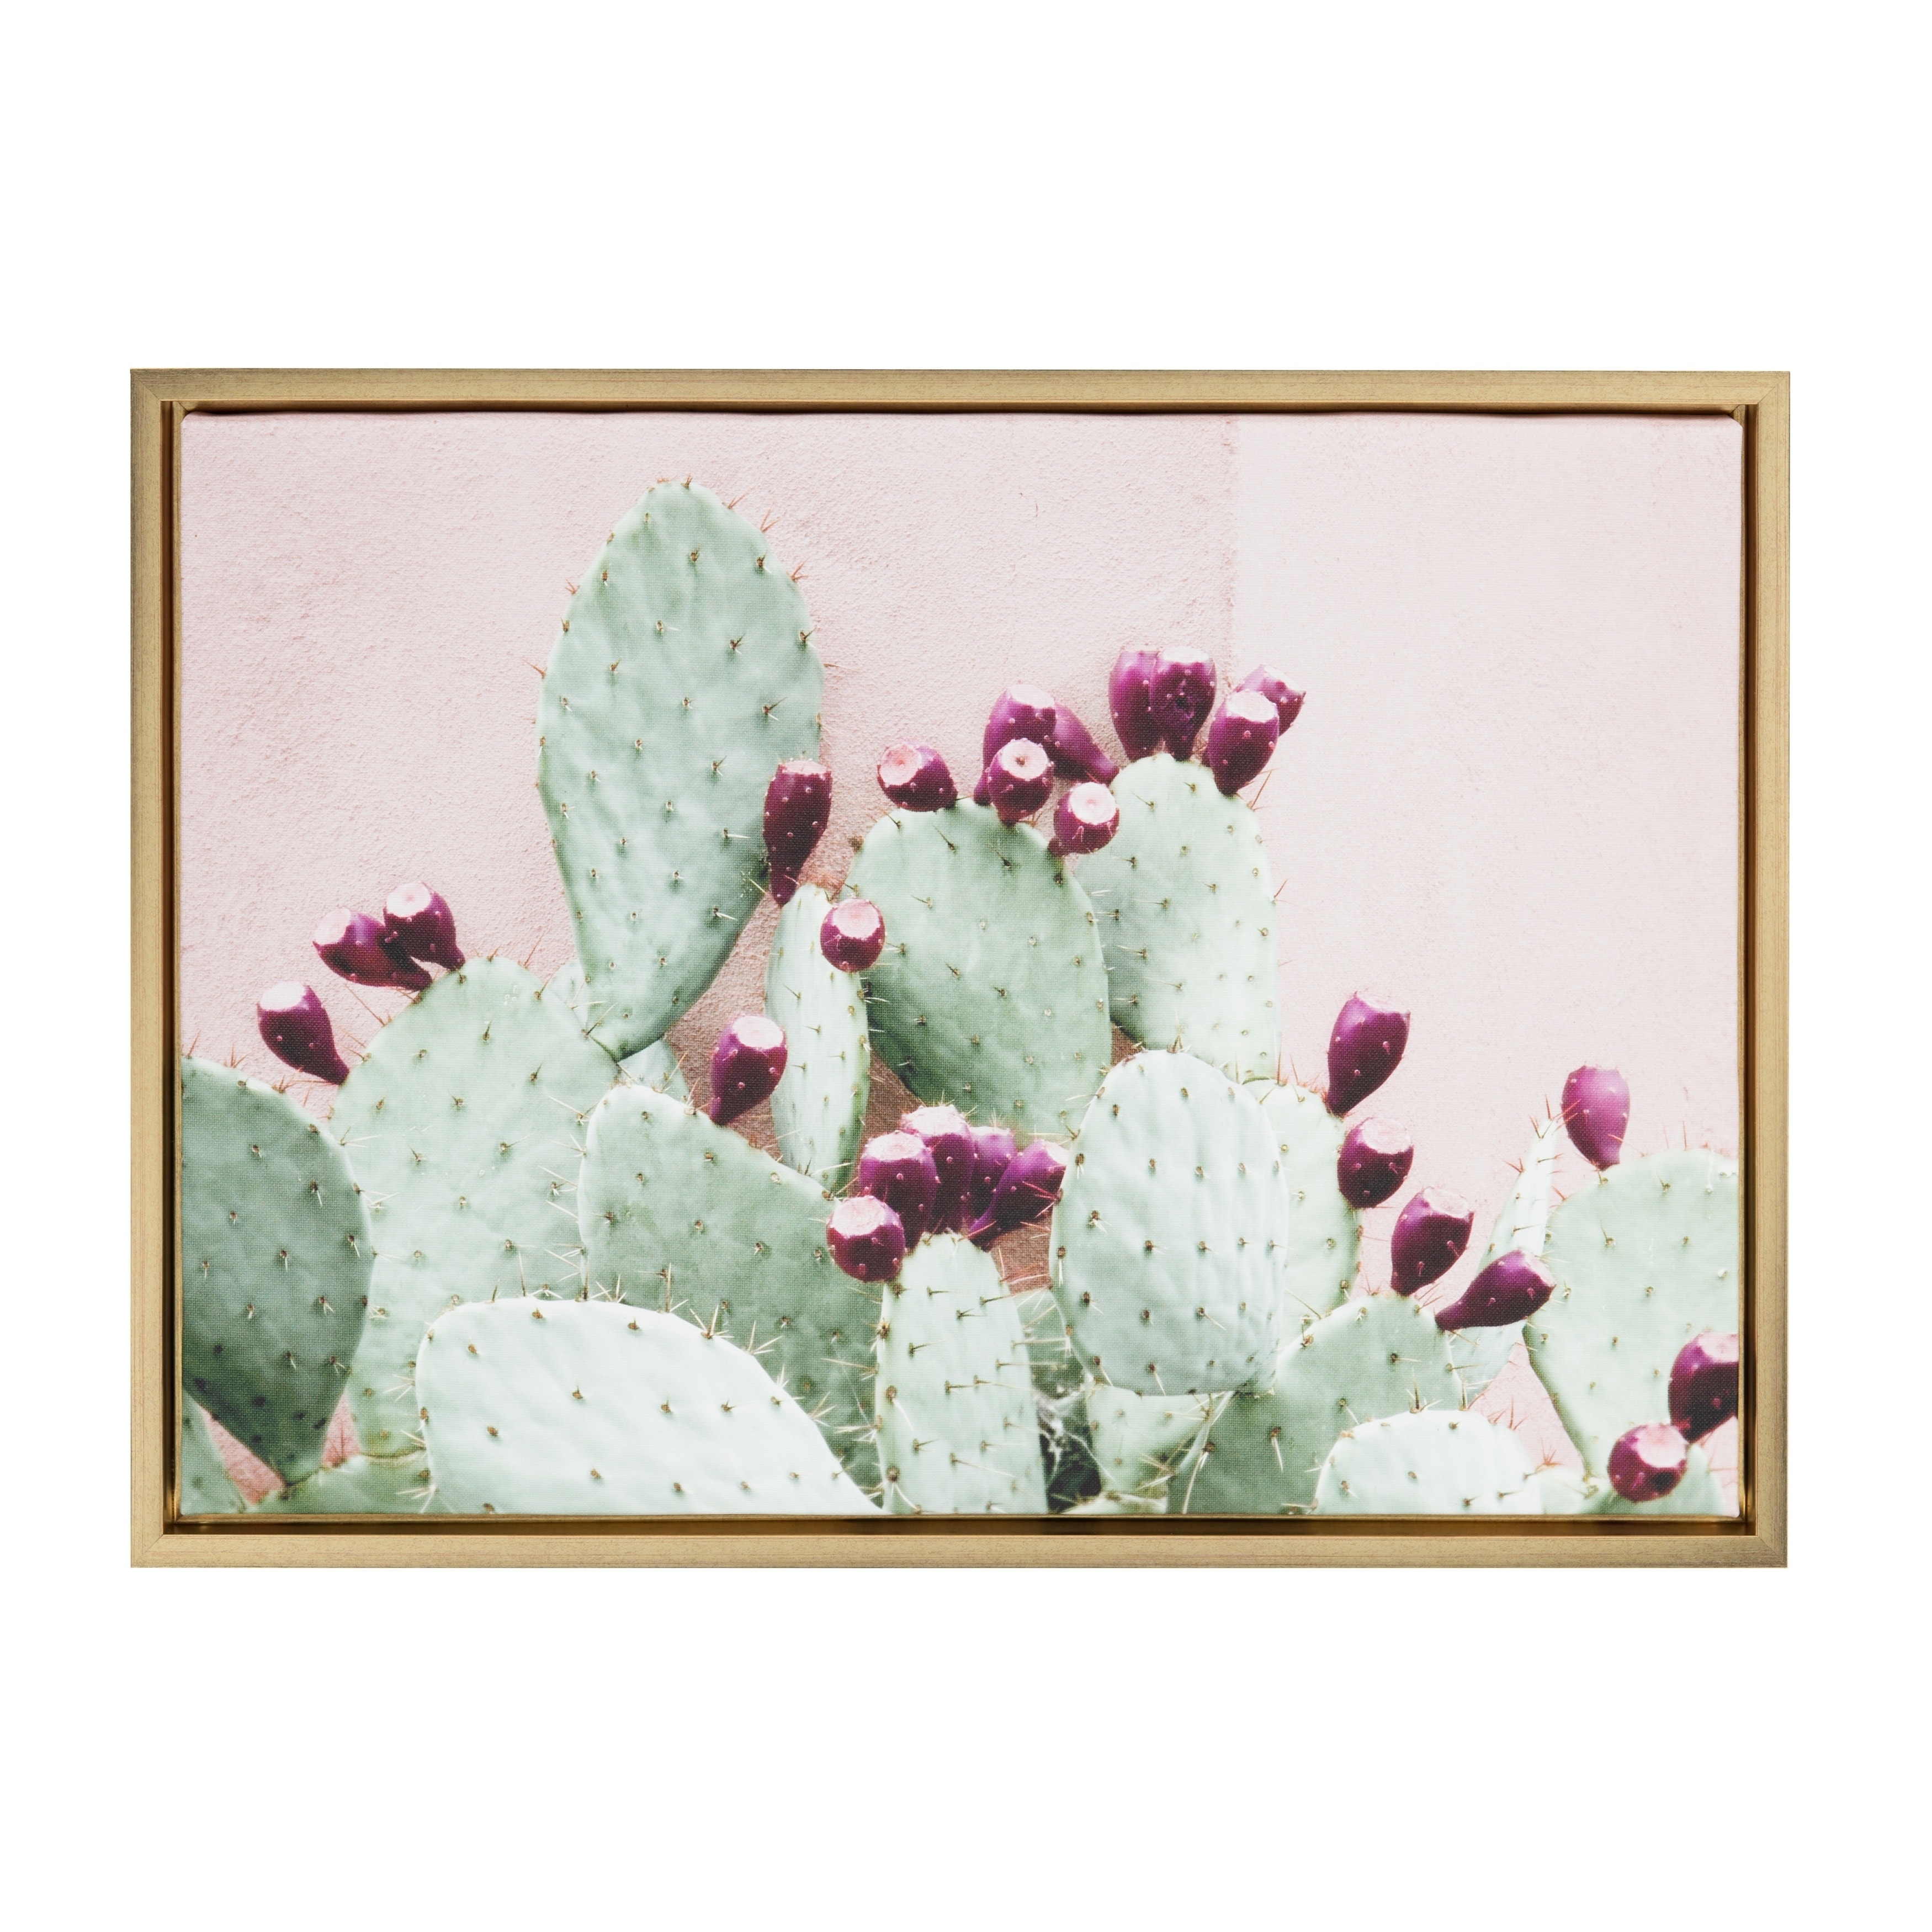 Sylvie Cactus 25 Gold Framed Canvas Wall Art by Amy Peterson, 18x24 On  Sale Bed Bath  Beyond 19468646